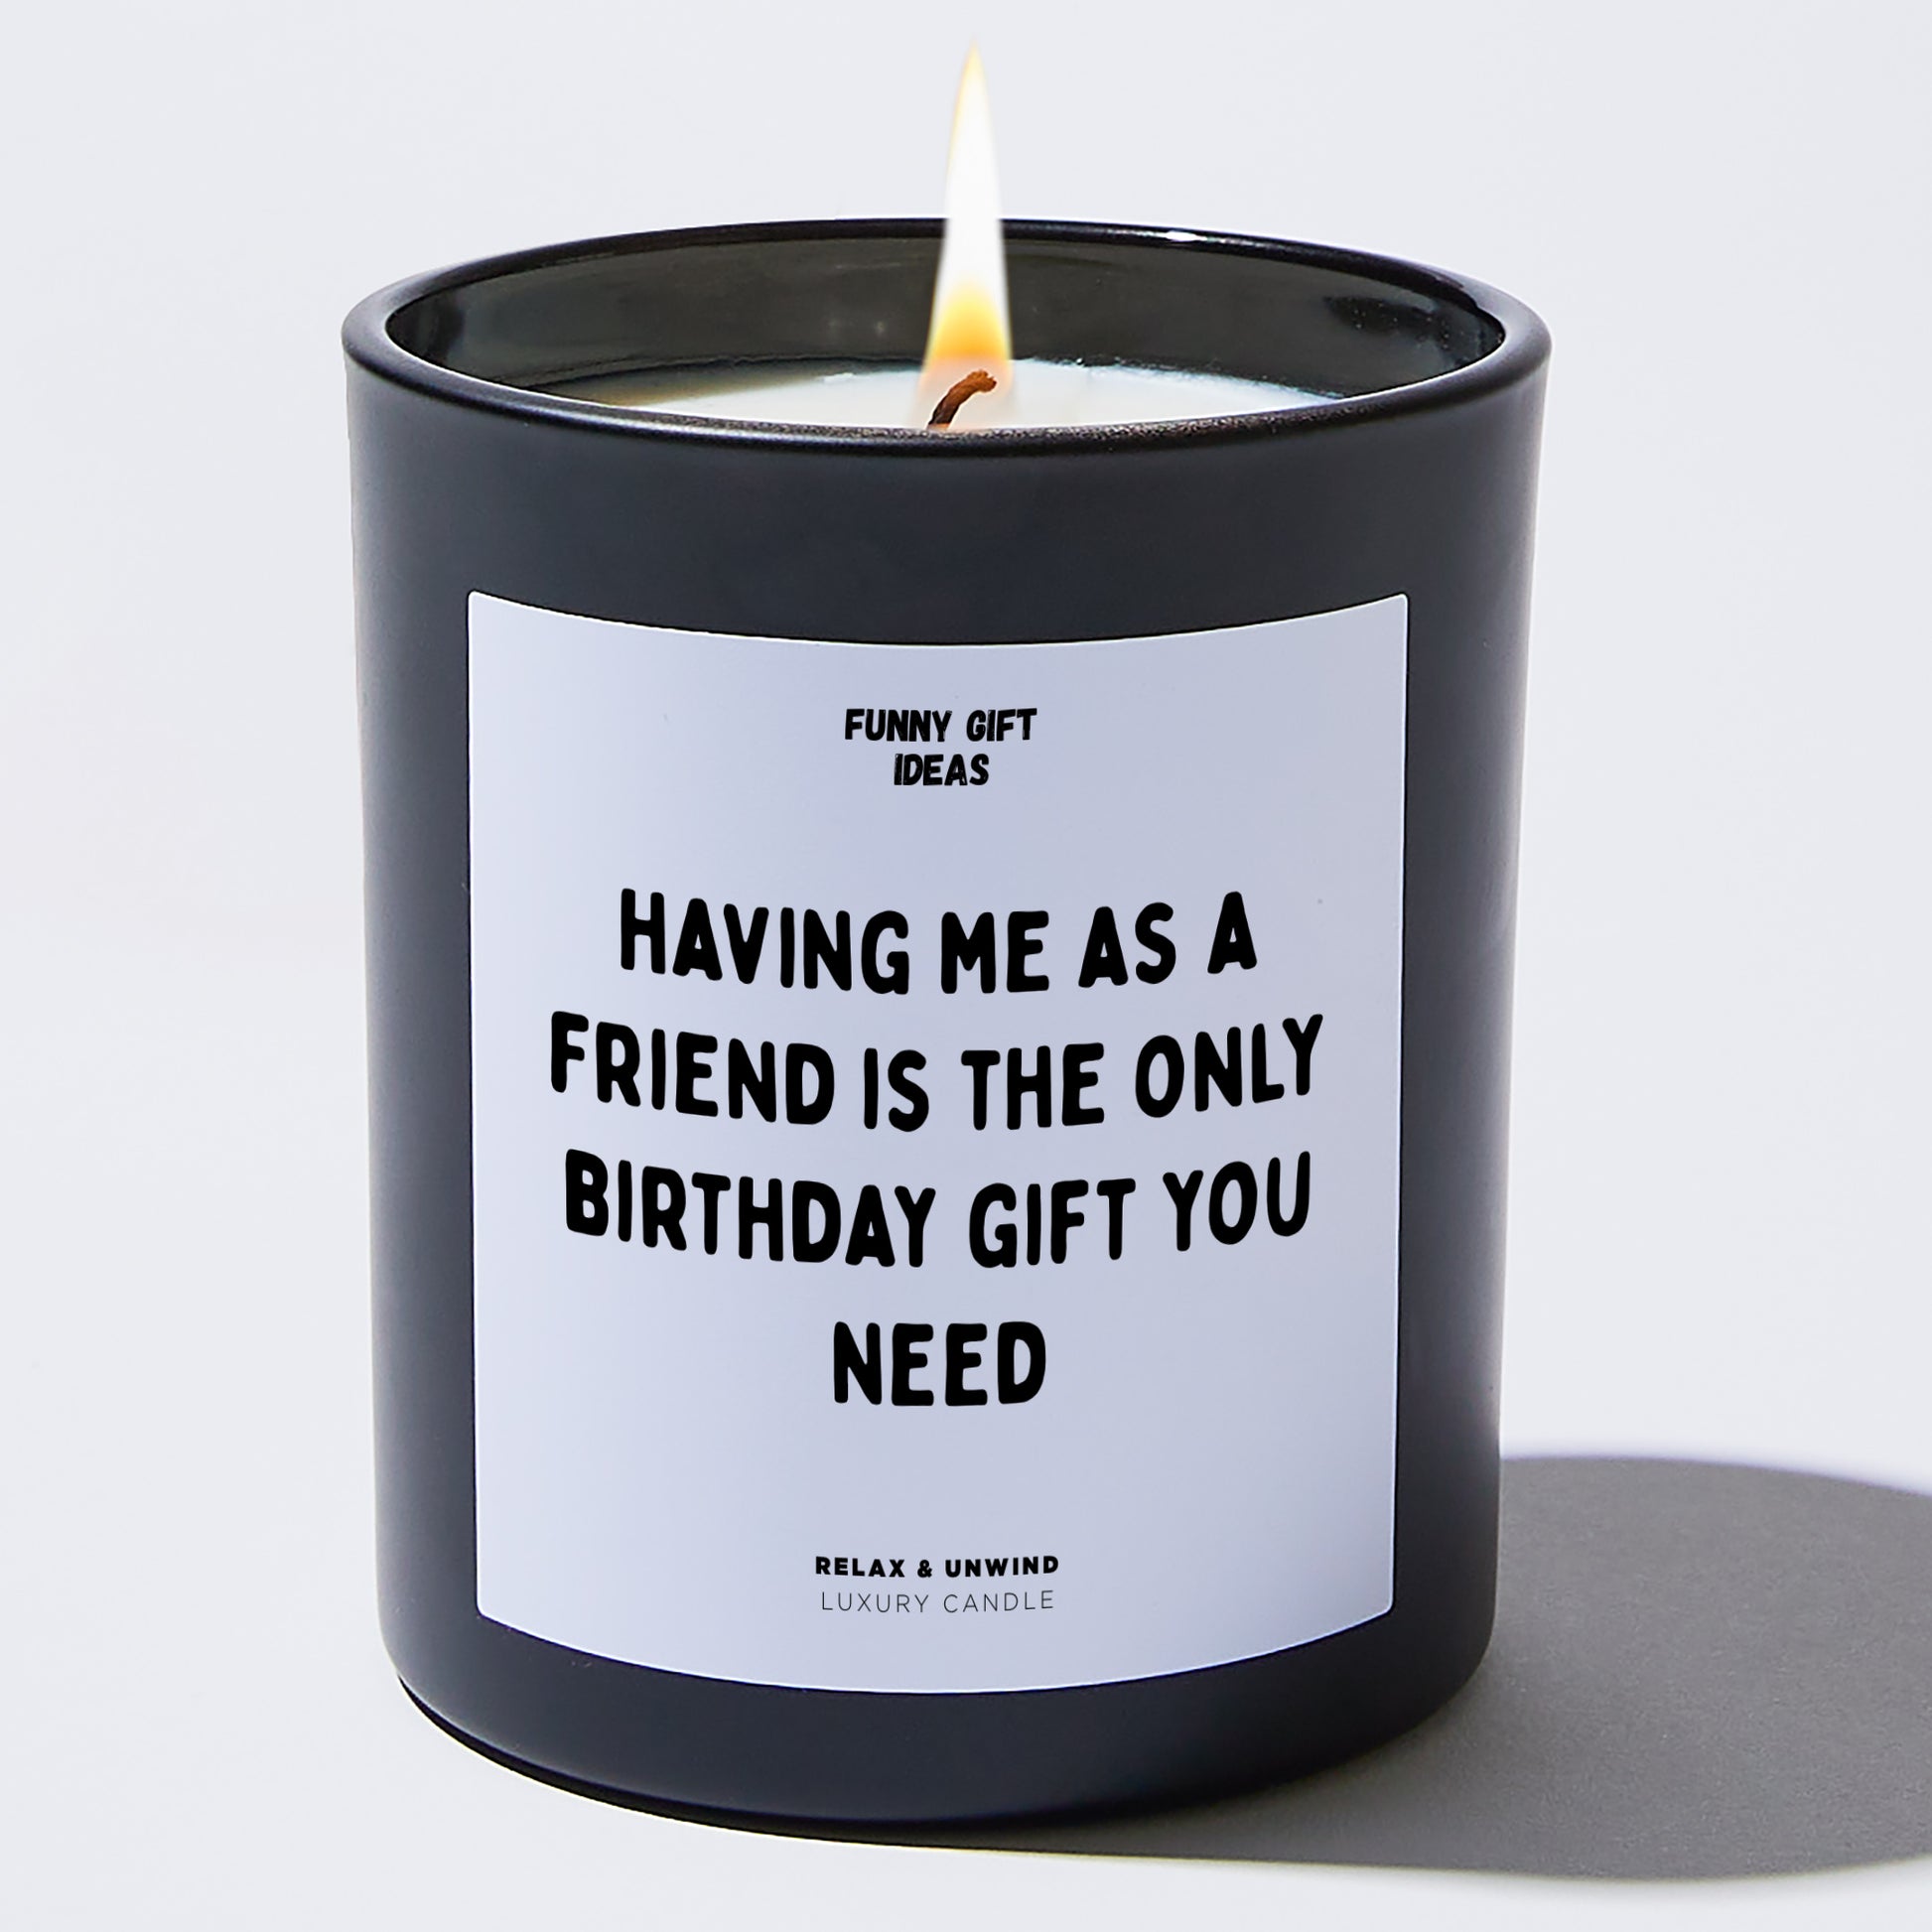 Happy Birthday Gift Having Me As A Friend Is The Only Happy Birthday Gift You Need - Funny Gift Ideas